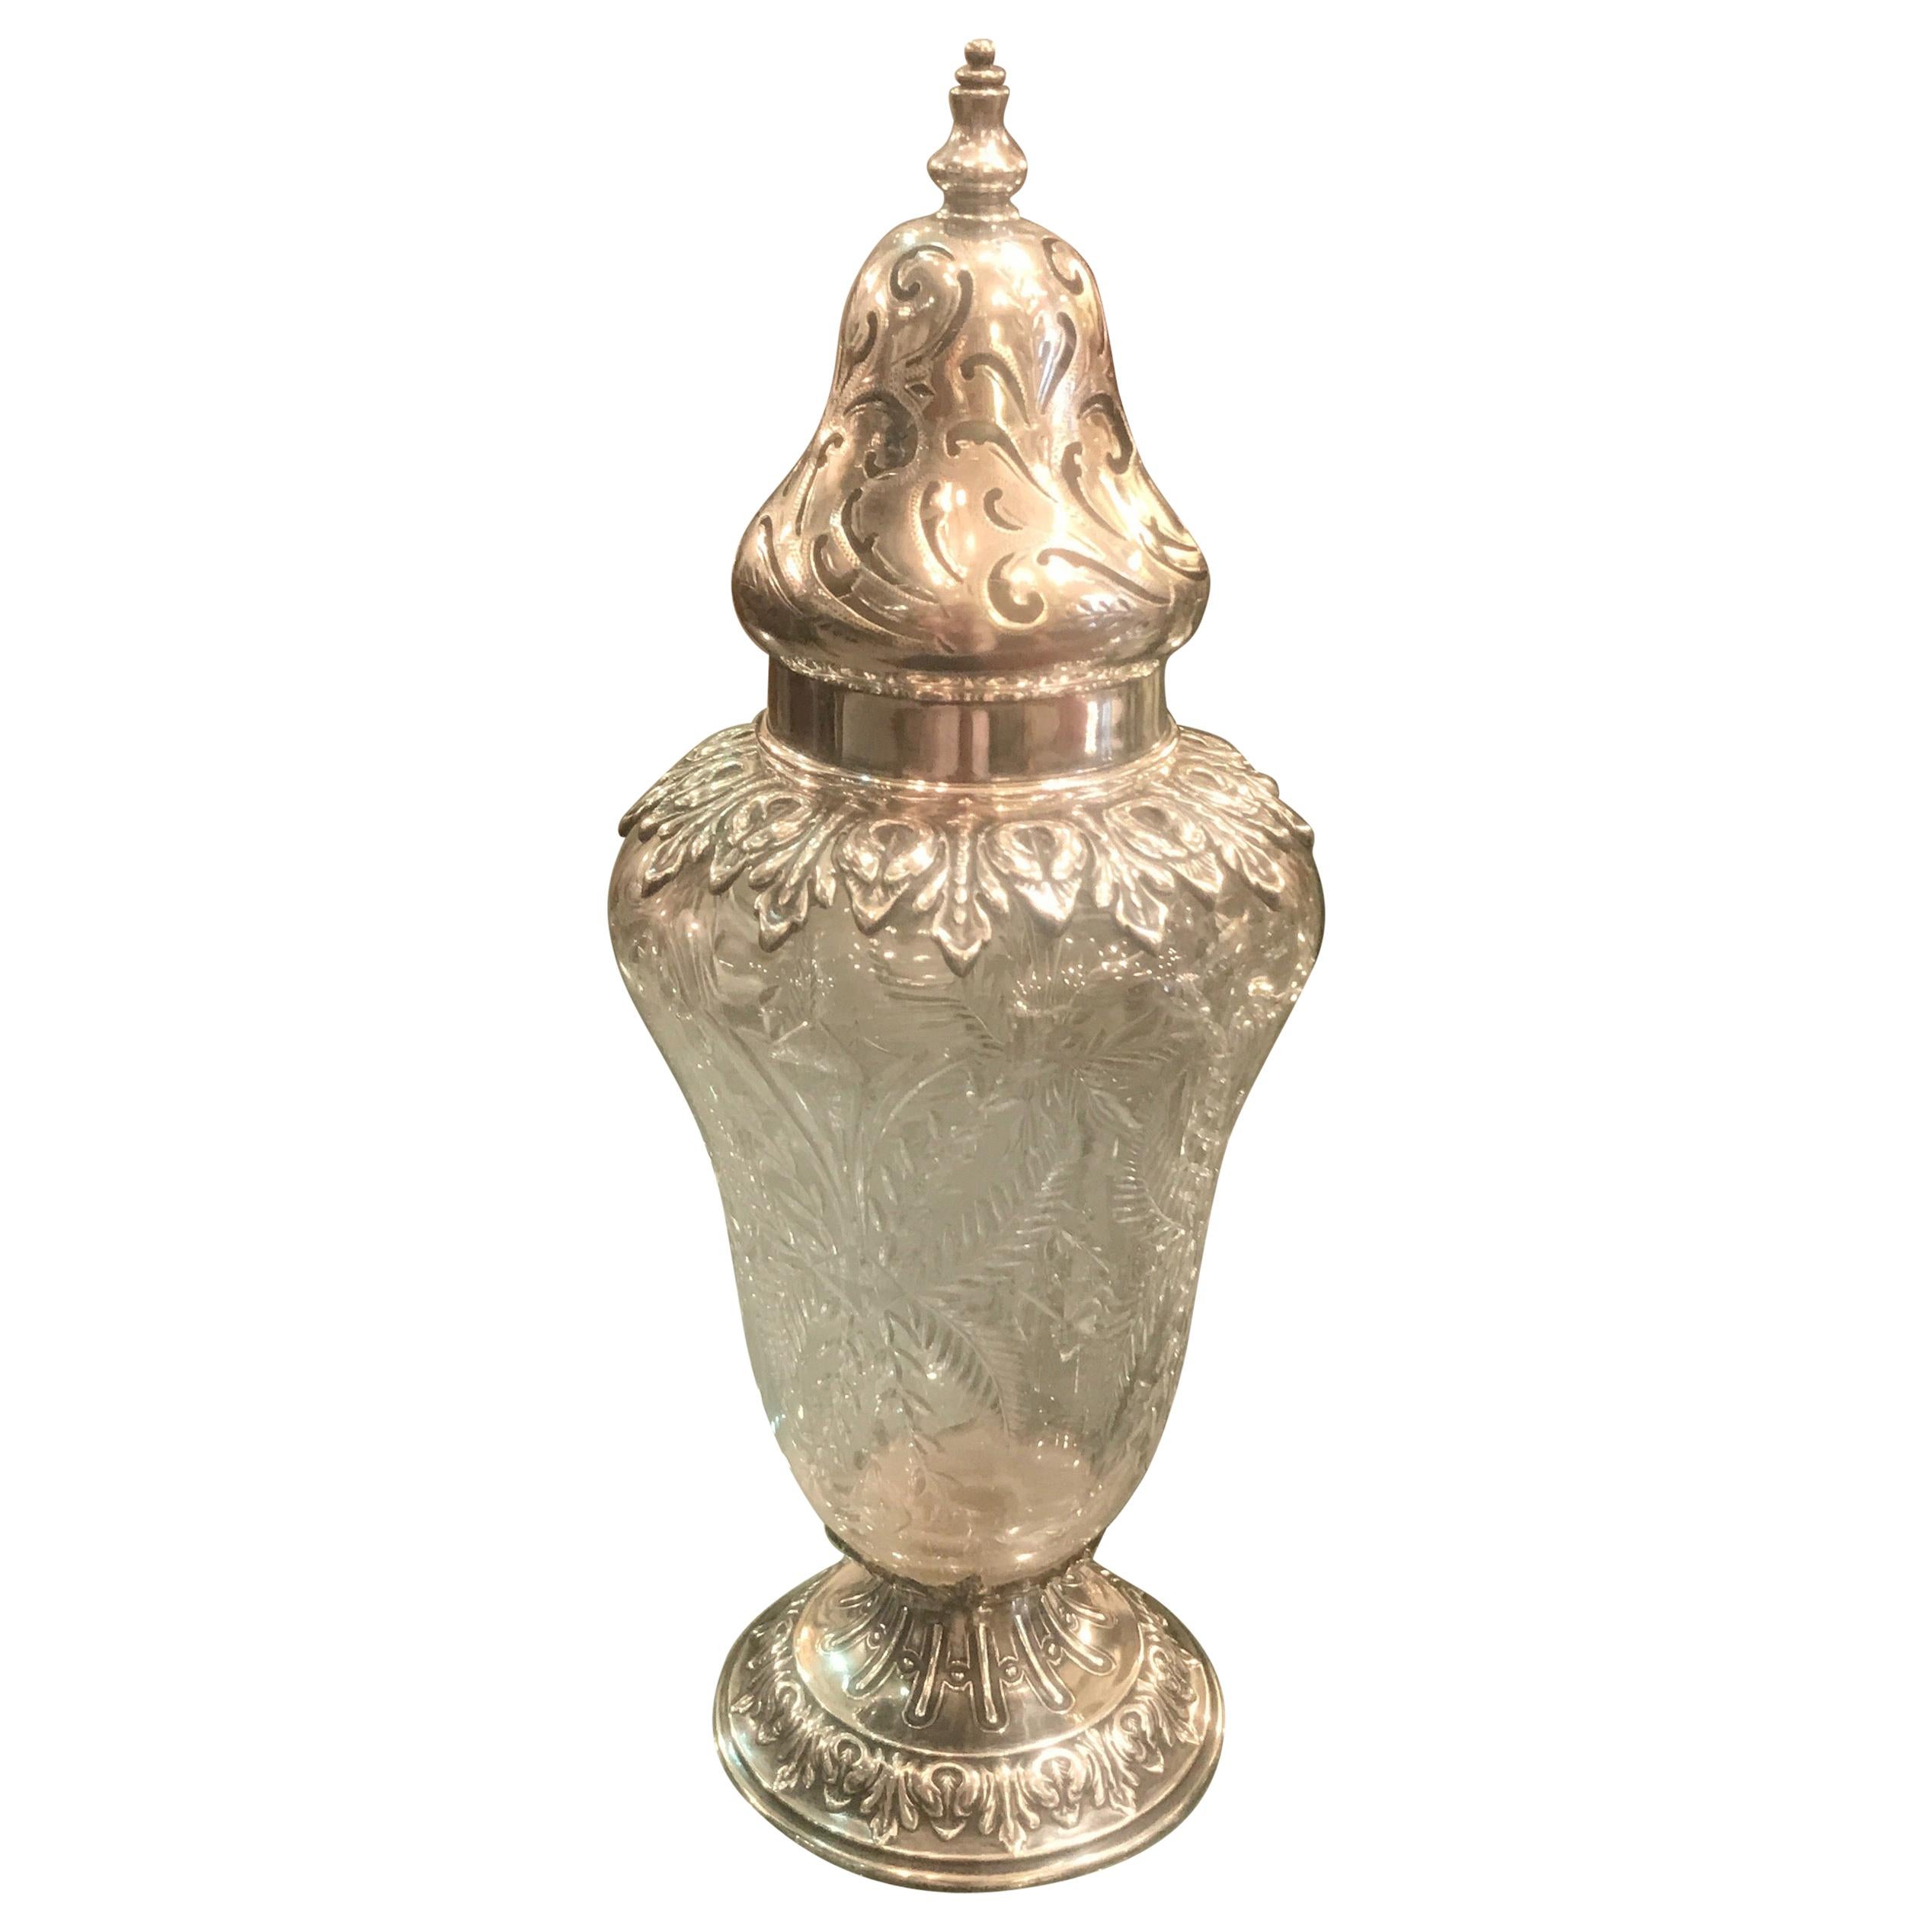 Pairpoint Sterling Silver Muffineer Sugar Shaker, 19th Century